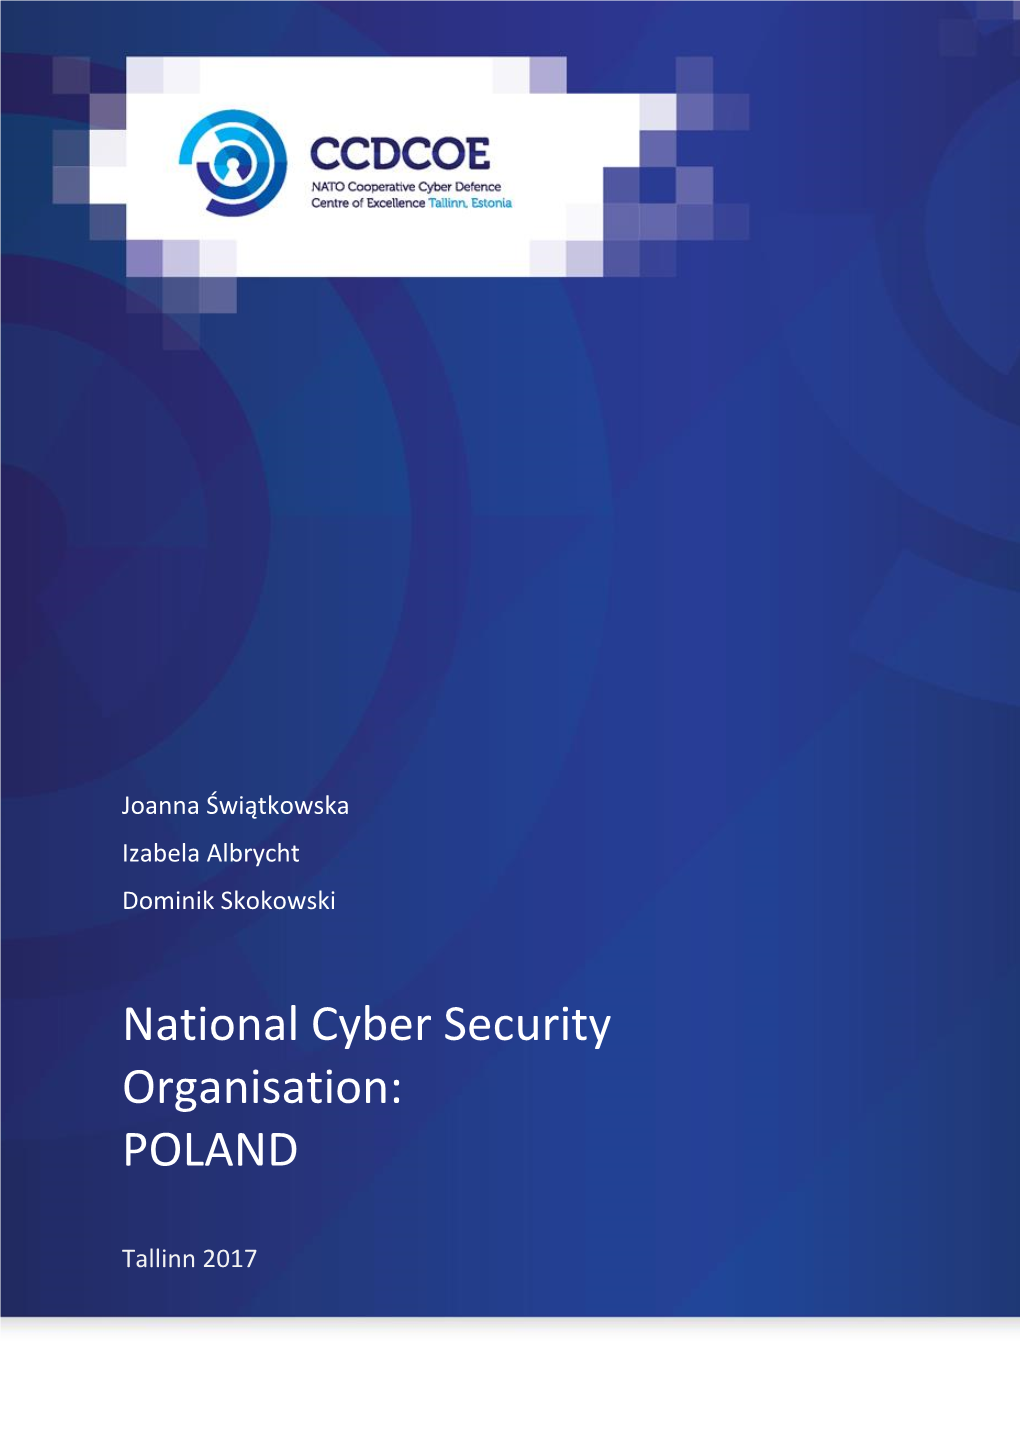 National Cyber Security Organisation: POLAND